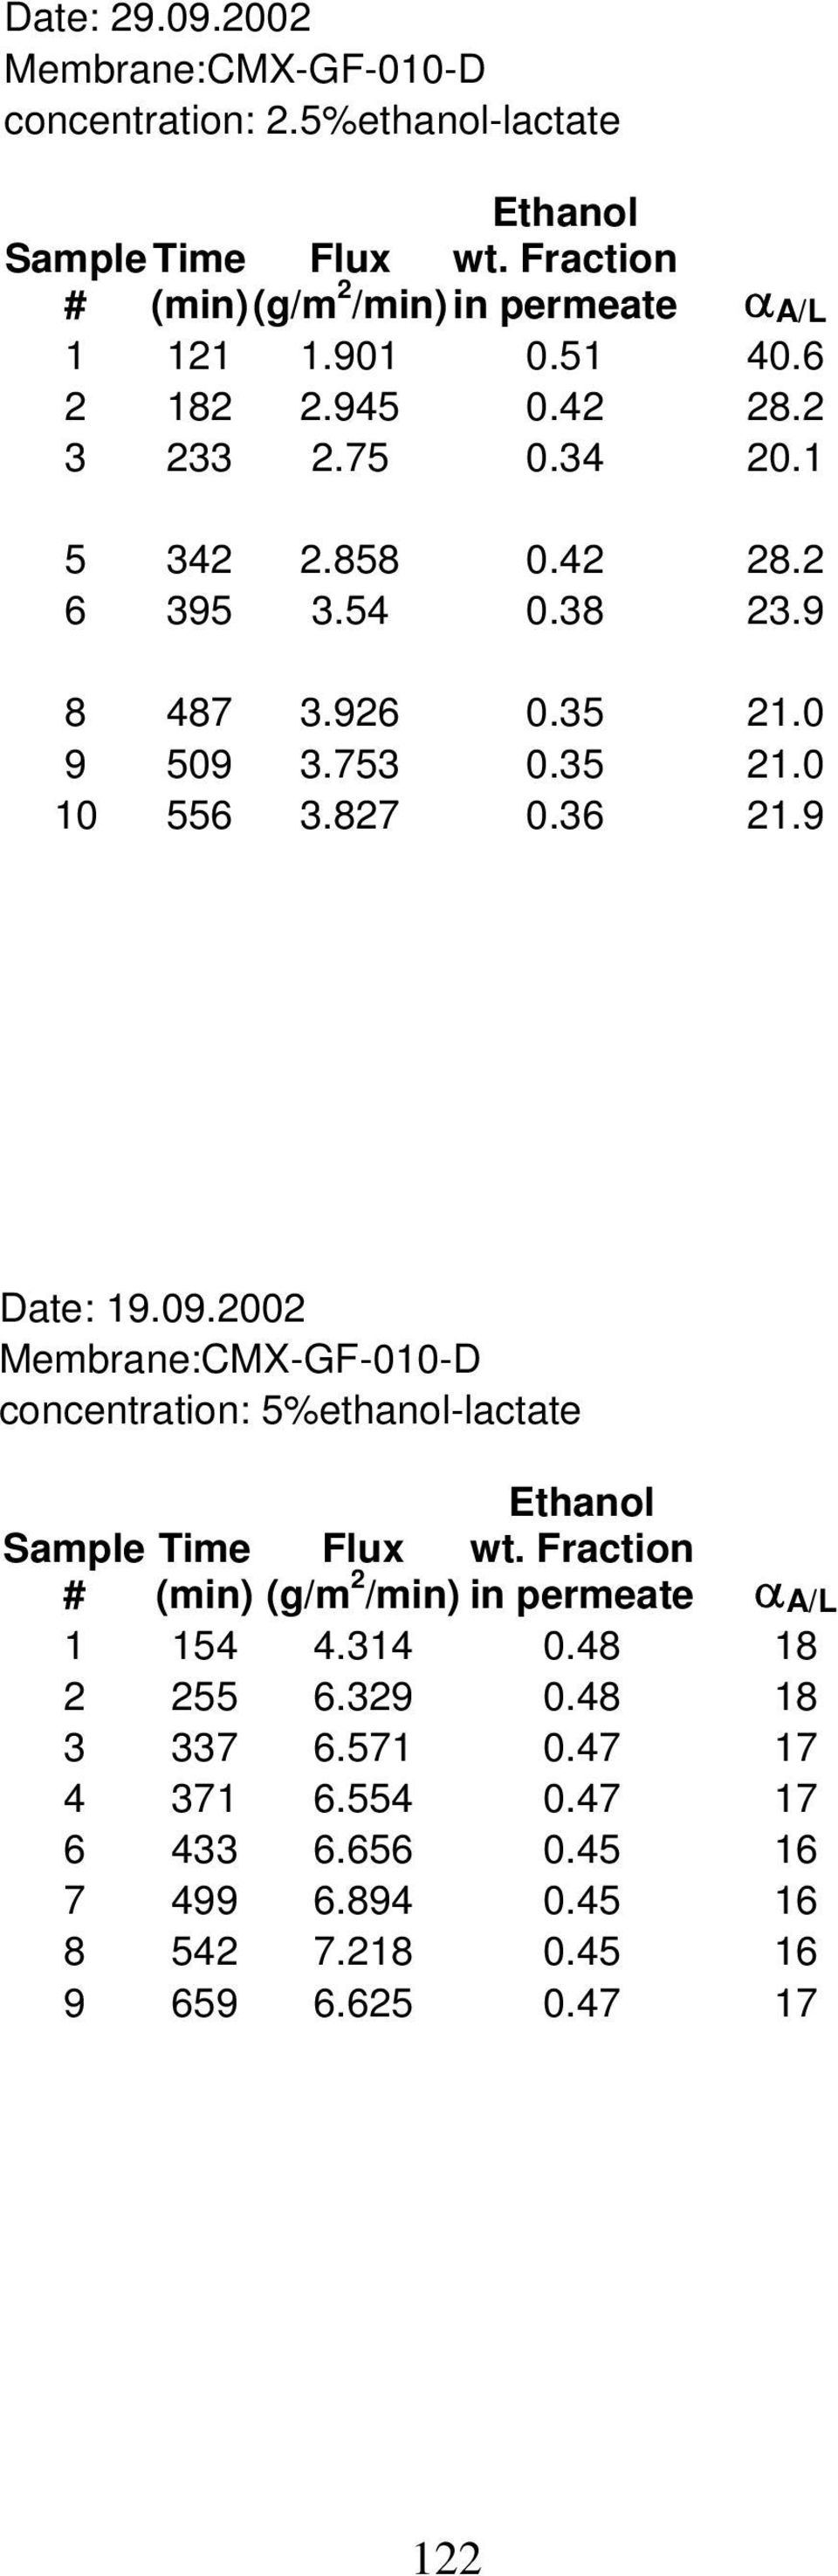 09.2002 concentration: 5%ethanol-lactate Sample Time Flux wt. Fraction # (min) (g/m 2 /min) in permeate 1 154 4.314 0.48 18 2 255 6.